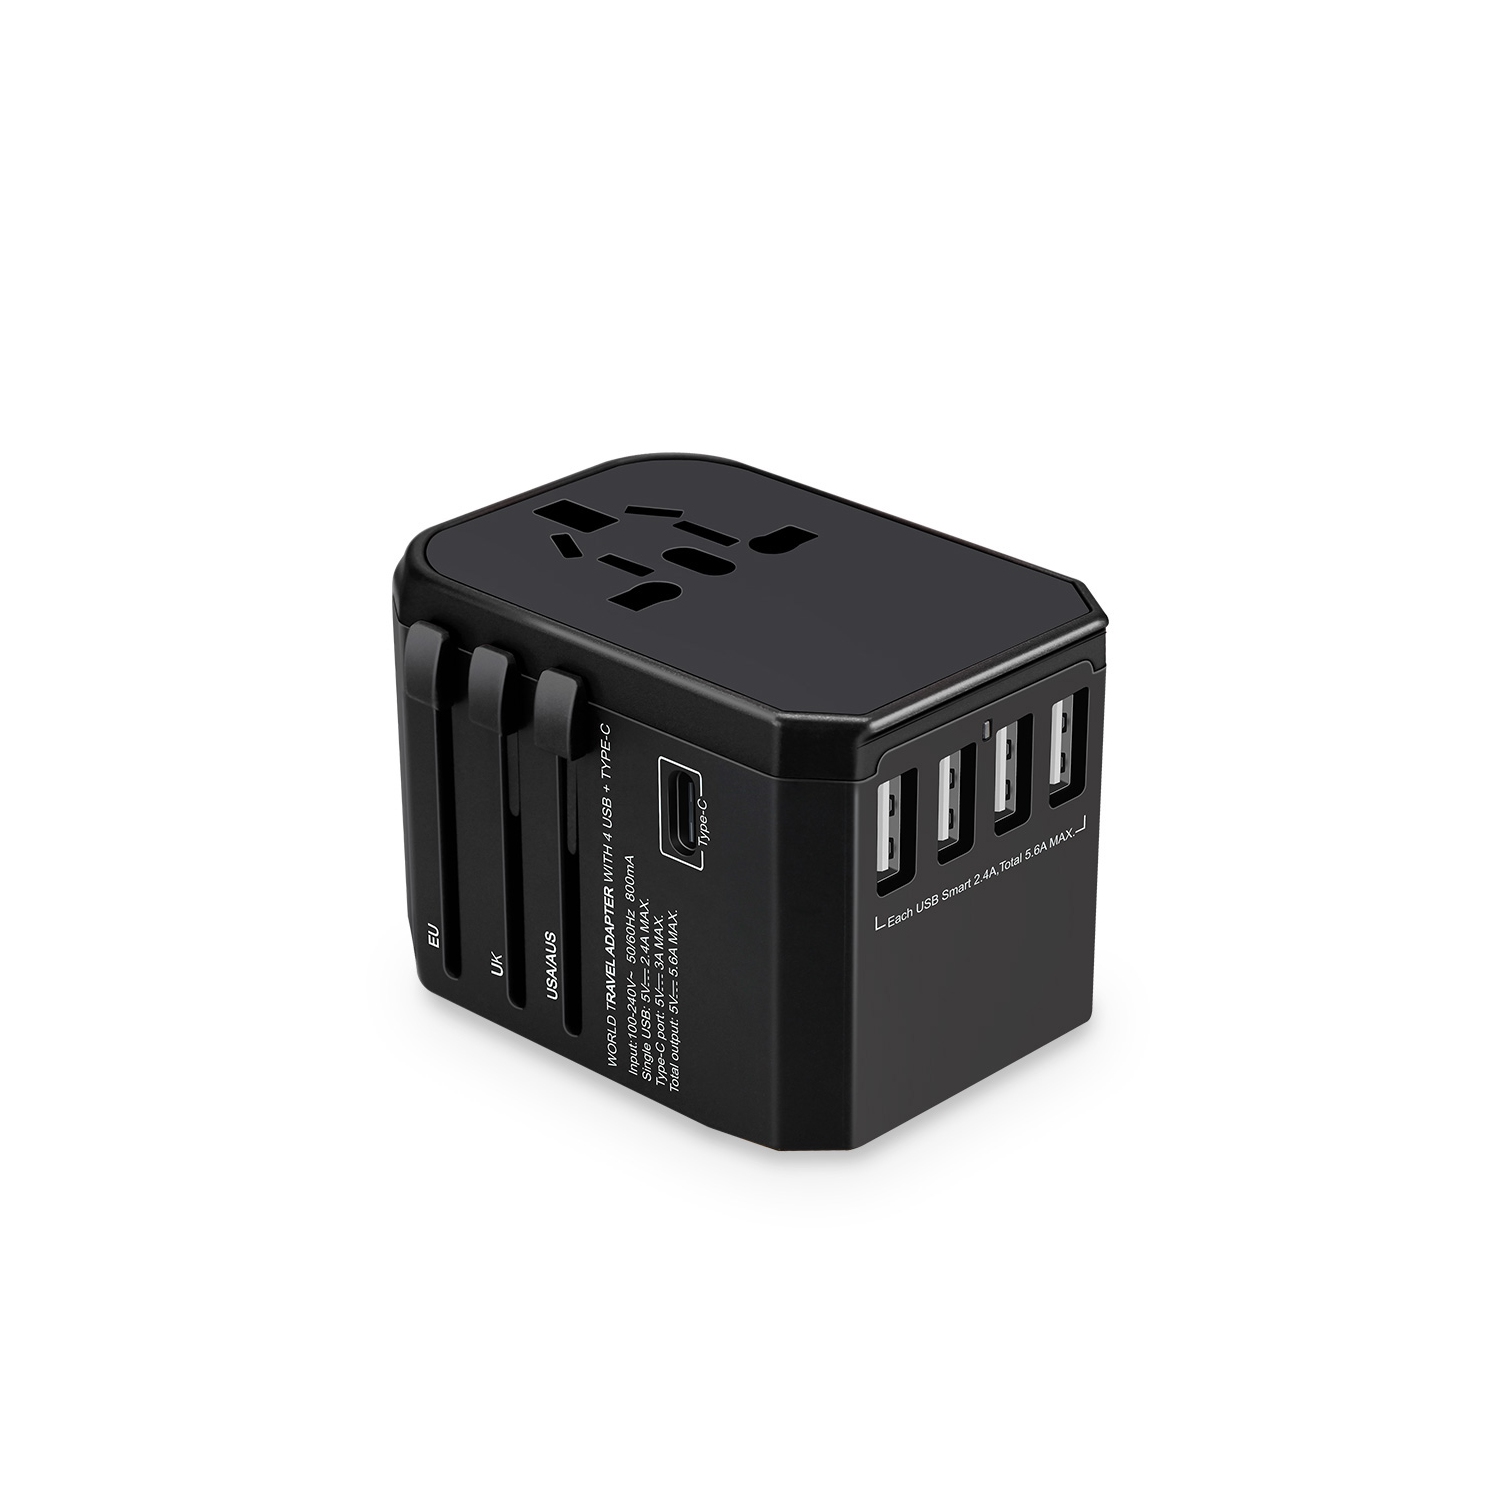 International Travel Adapter with 3 USB and 1 USB Type-C port fast charging for USA/UK/ASIA/AUS